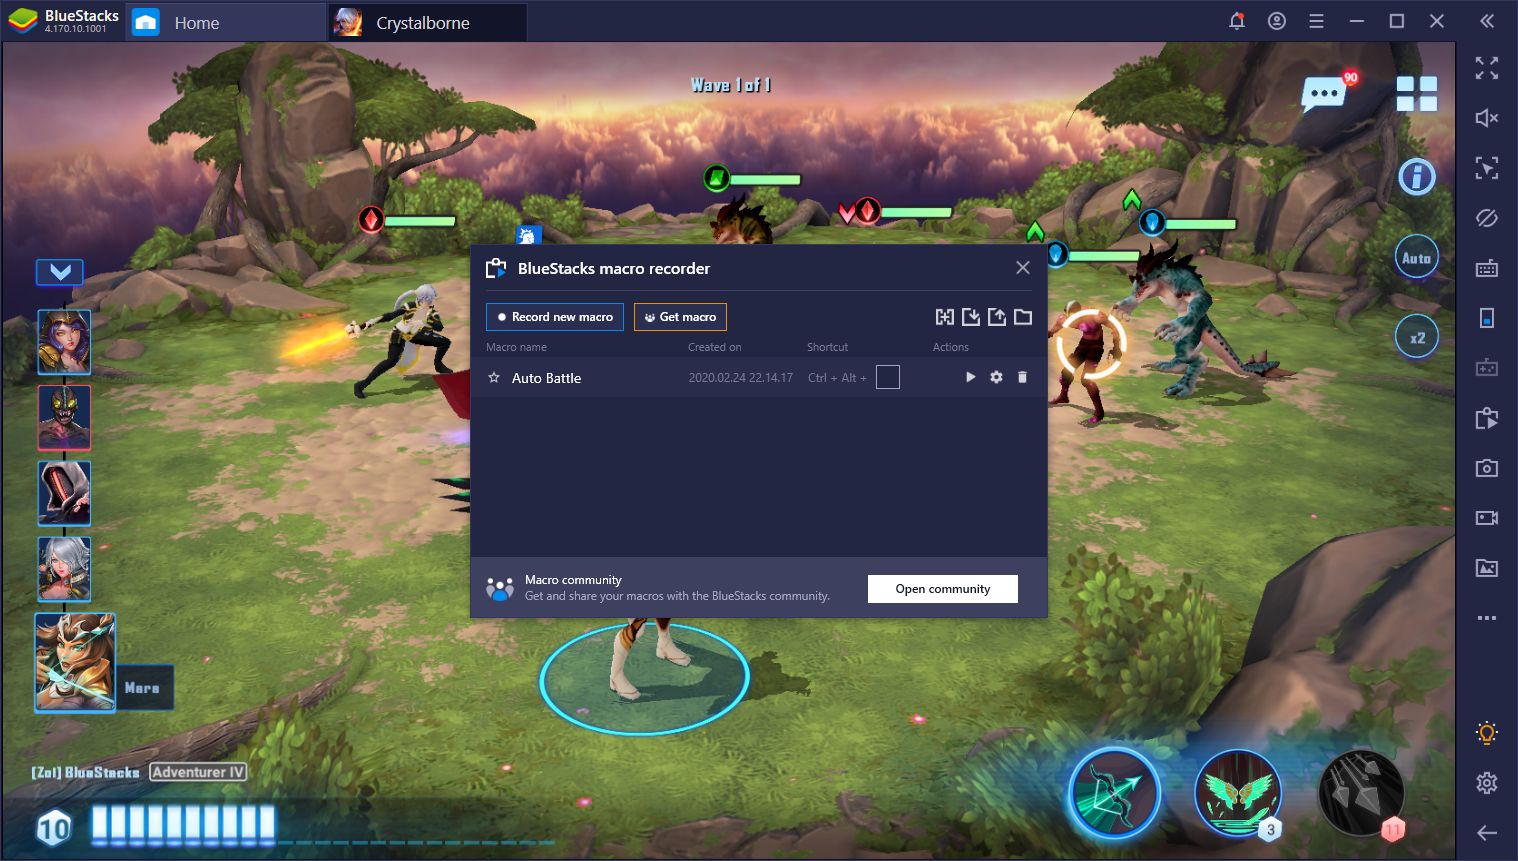 How to Win at Crystalborne: Heroes of Fate on PC with BlueStacks